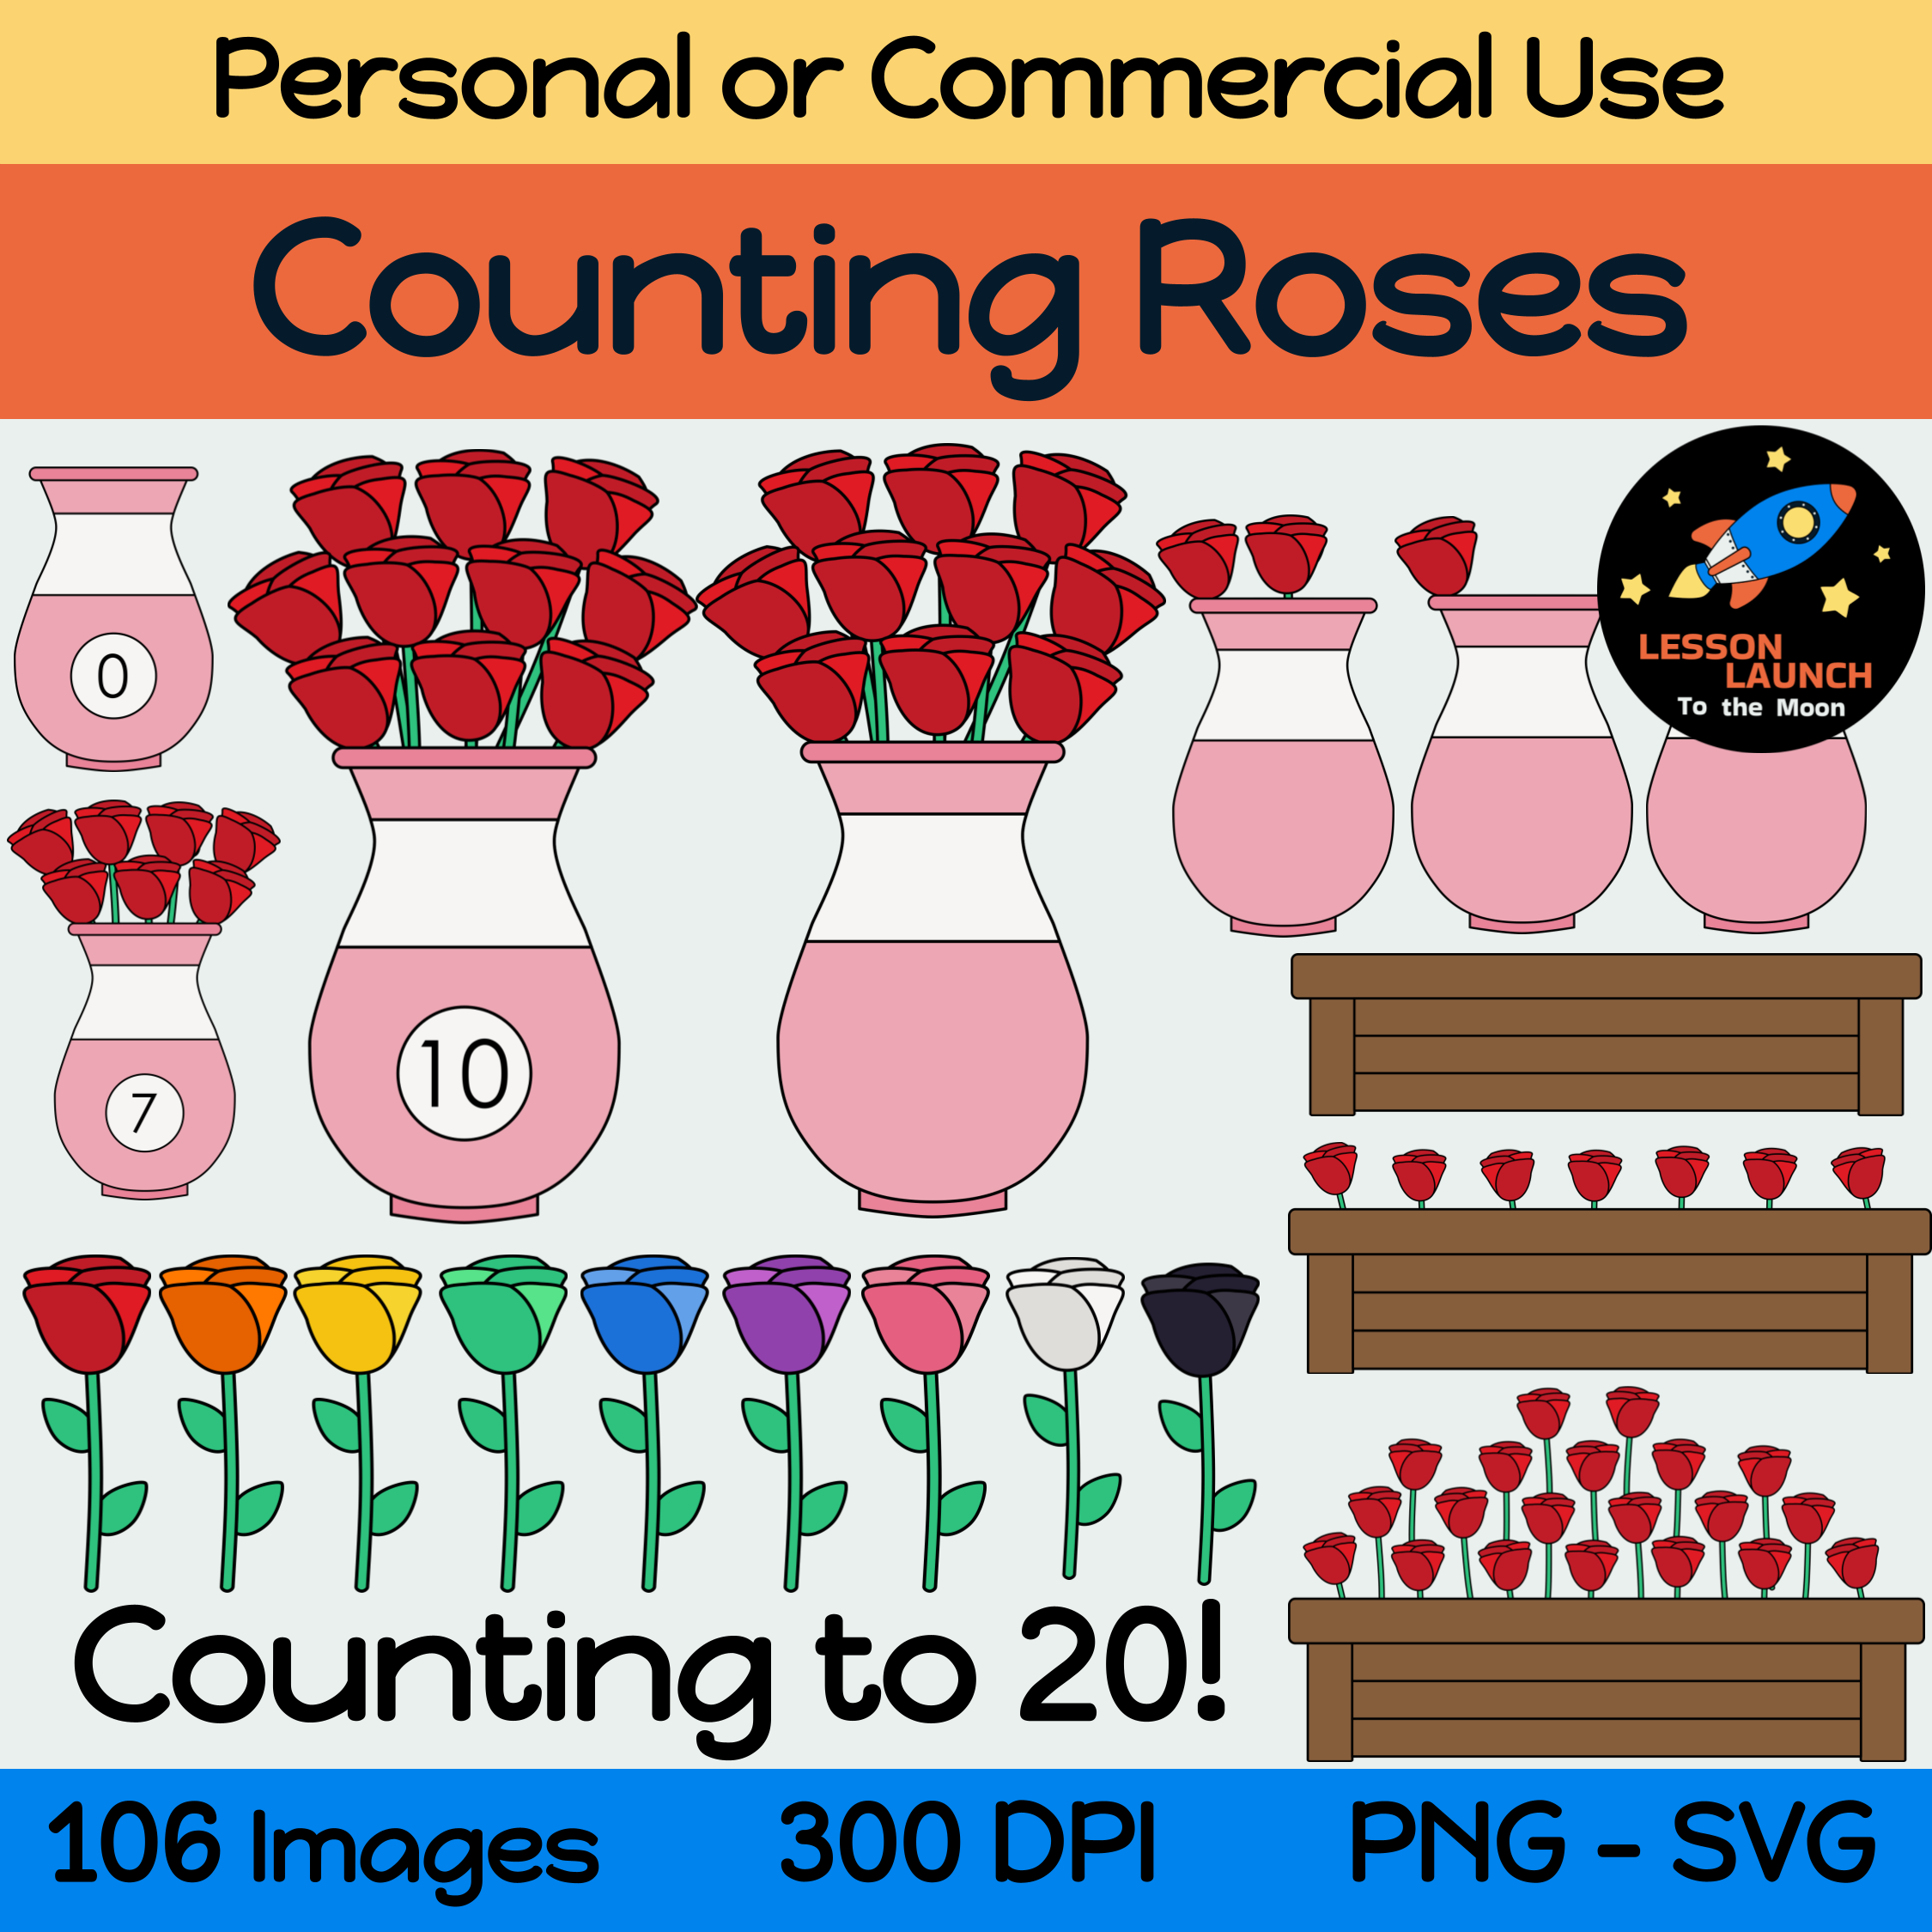 Roses in Vases and Planter Boxes (Counting Valentine's Day Flowers) - Clipart